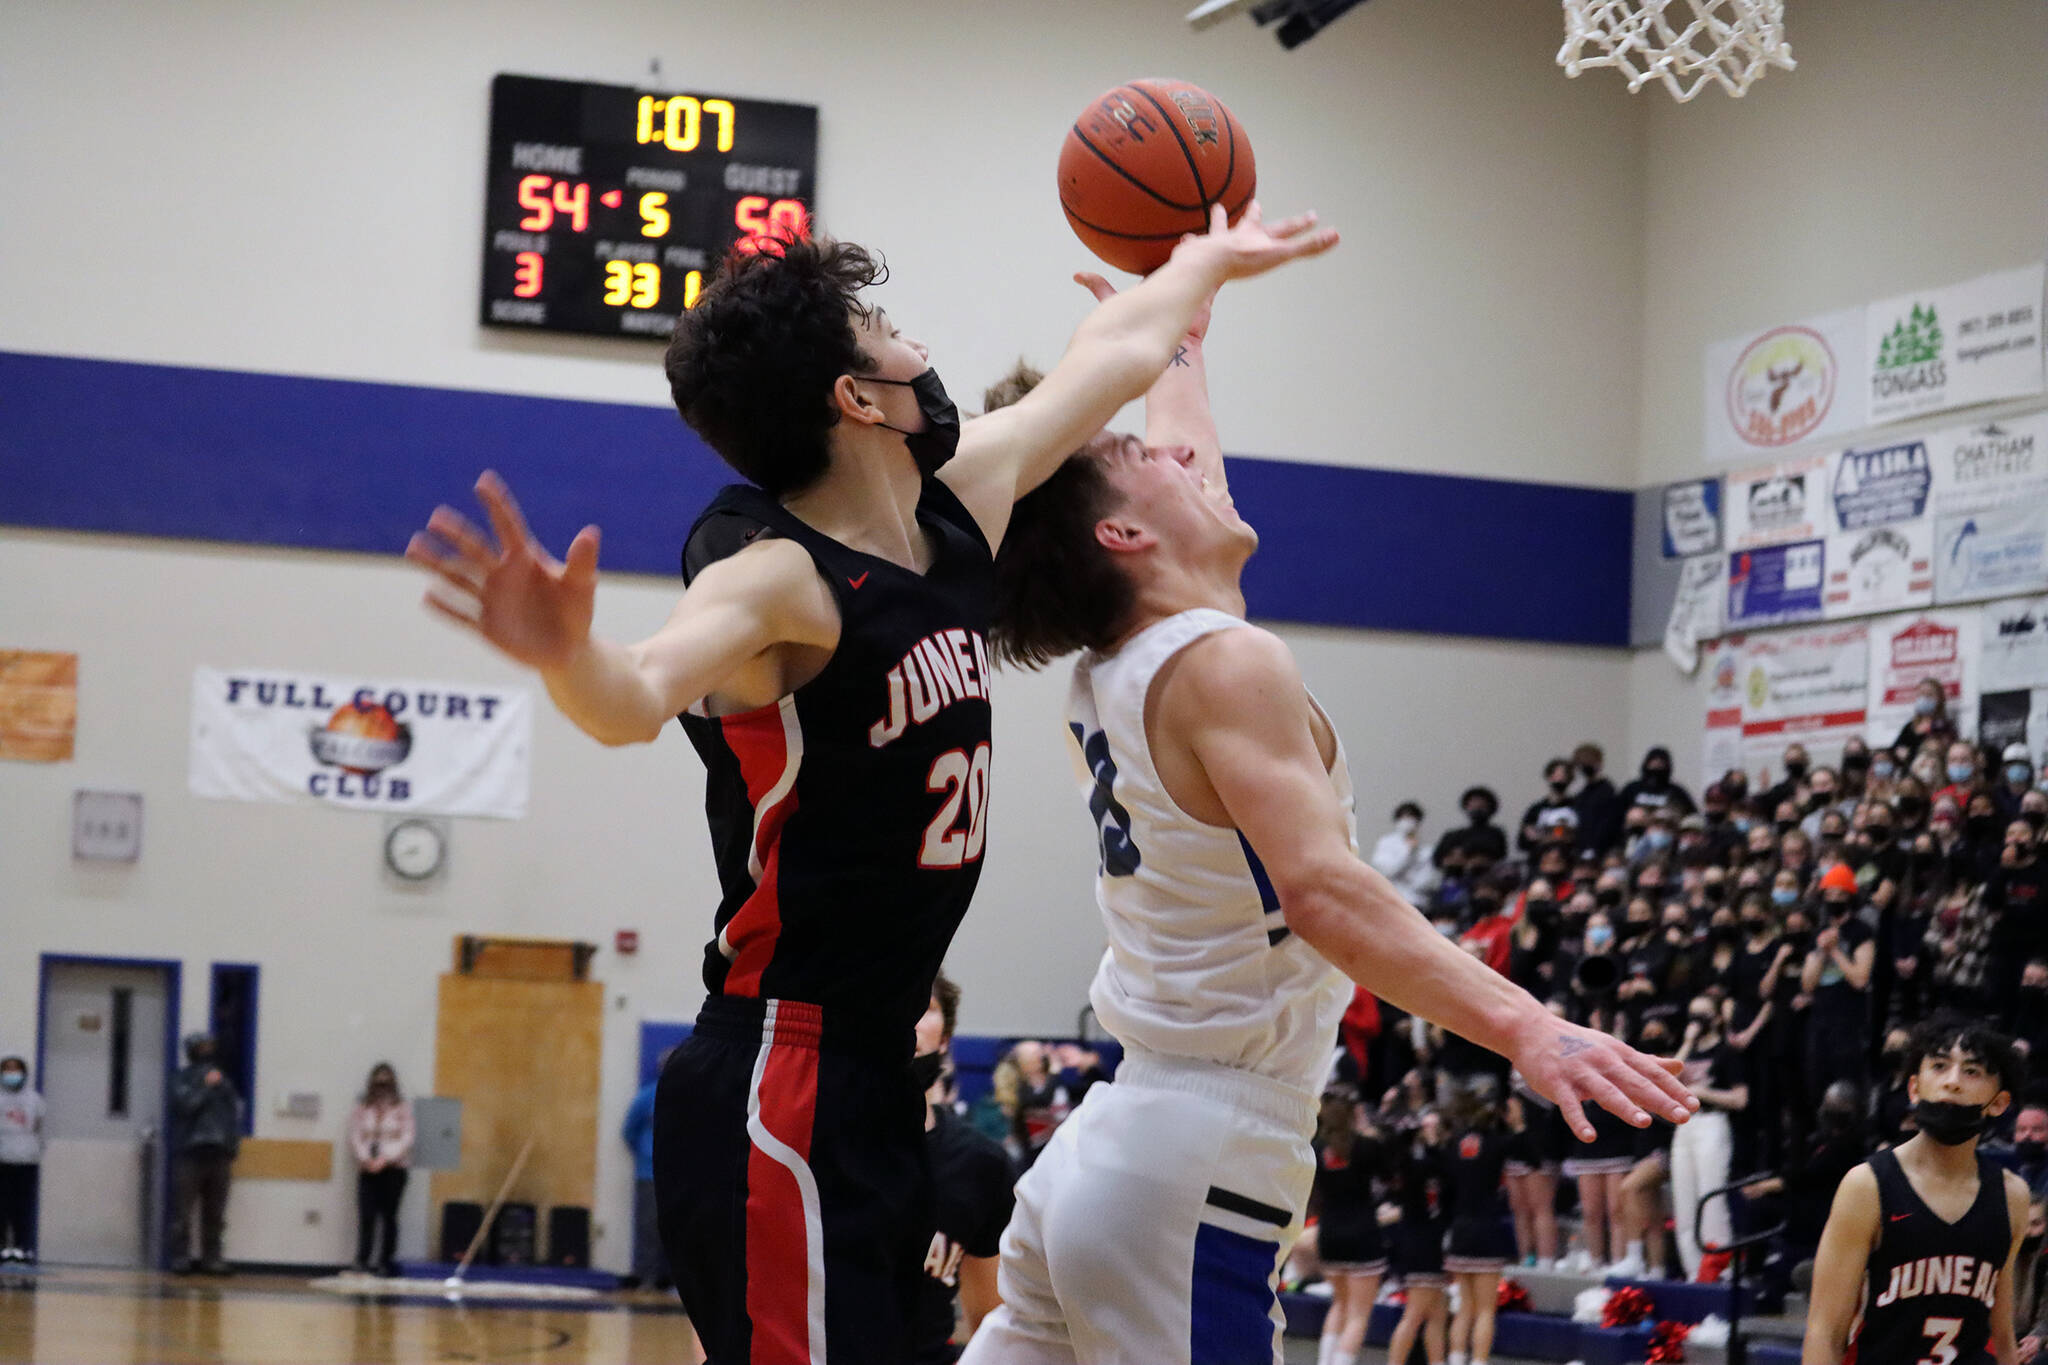 JDHS’ Orion Dybdahl contests a shot from TMHS’ Thomas Baxter late in Saturday night’s game. Thunder Mountain High School wound up winning 56-55 in overtime. (Ben Hohenstatt / Juneau Empire)